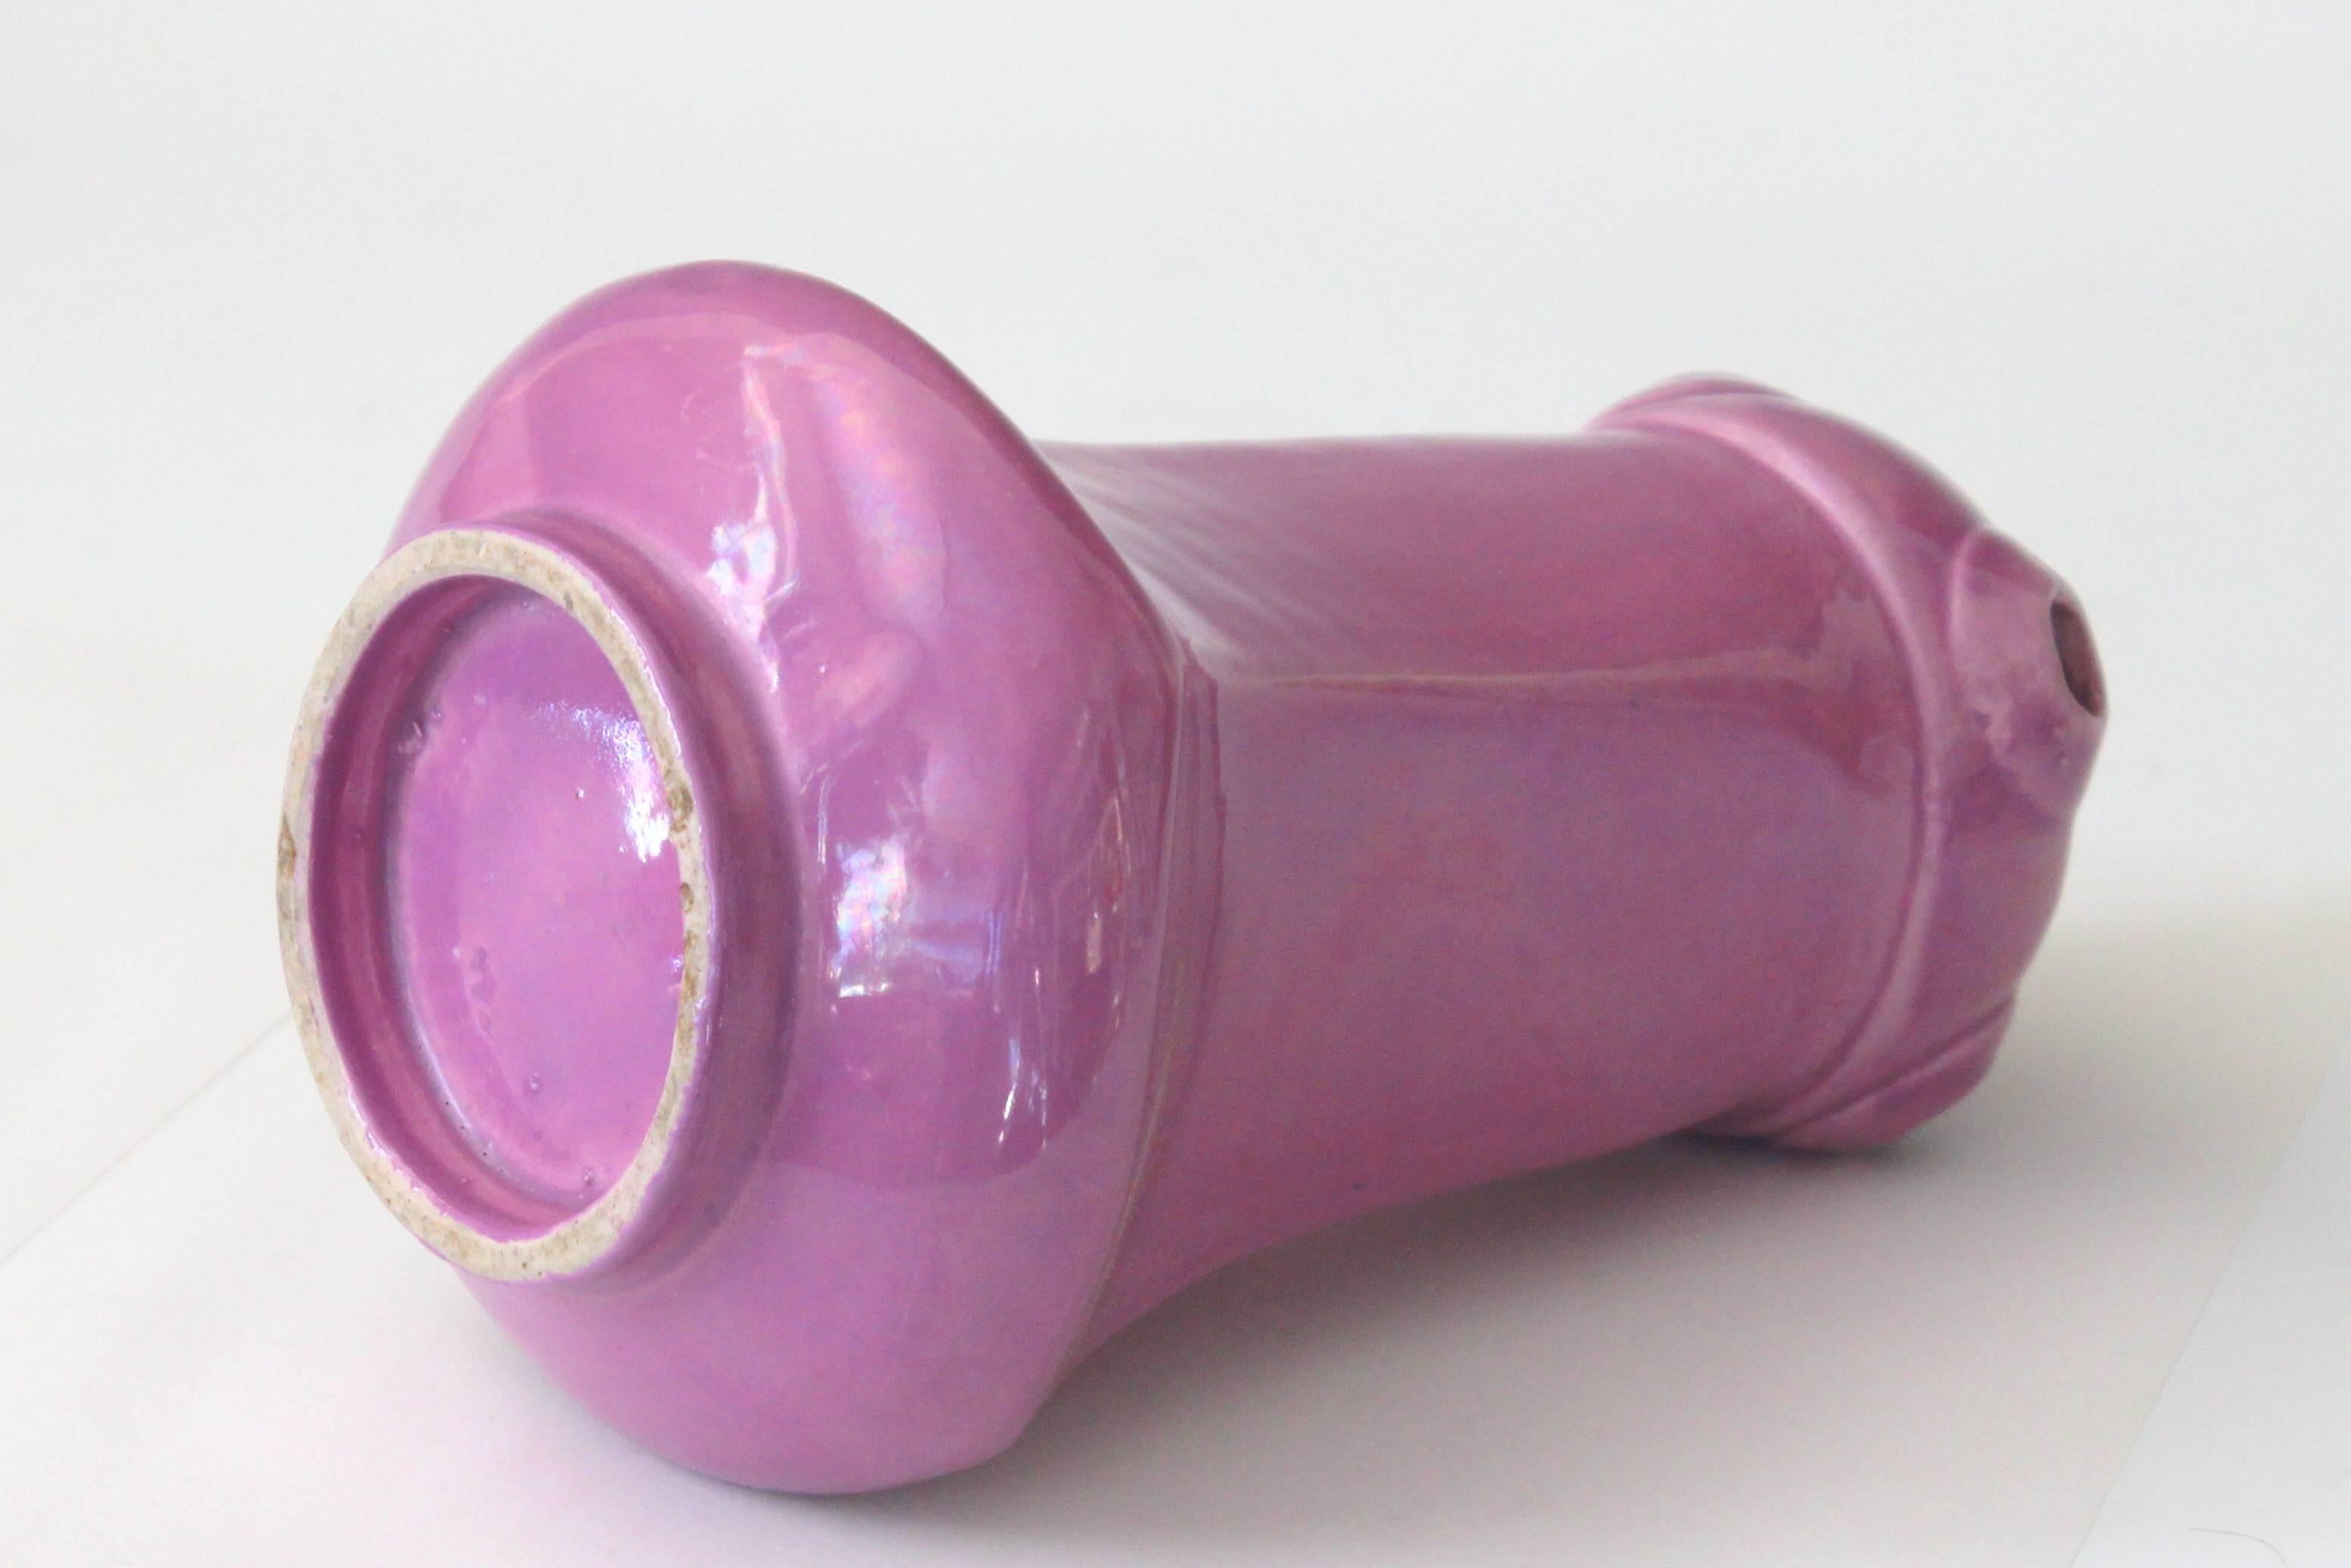 Awaji Pottery Art Deco Vase in Pink Glaze In Excellent Condition For Sale In Wilton, CT